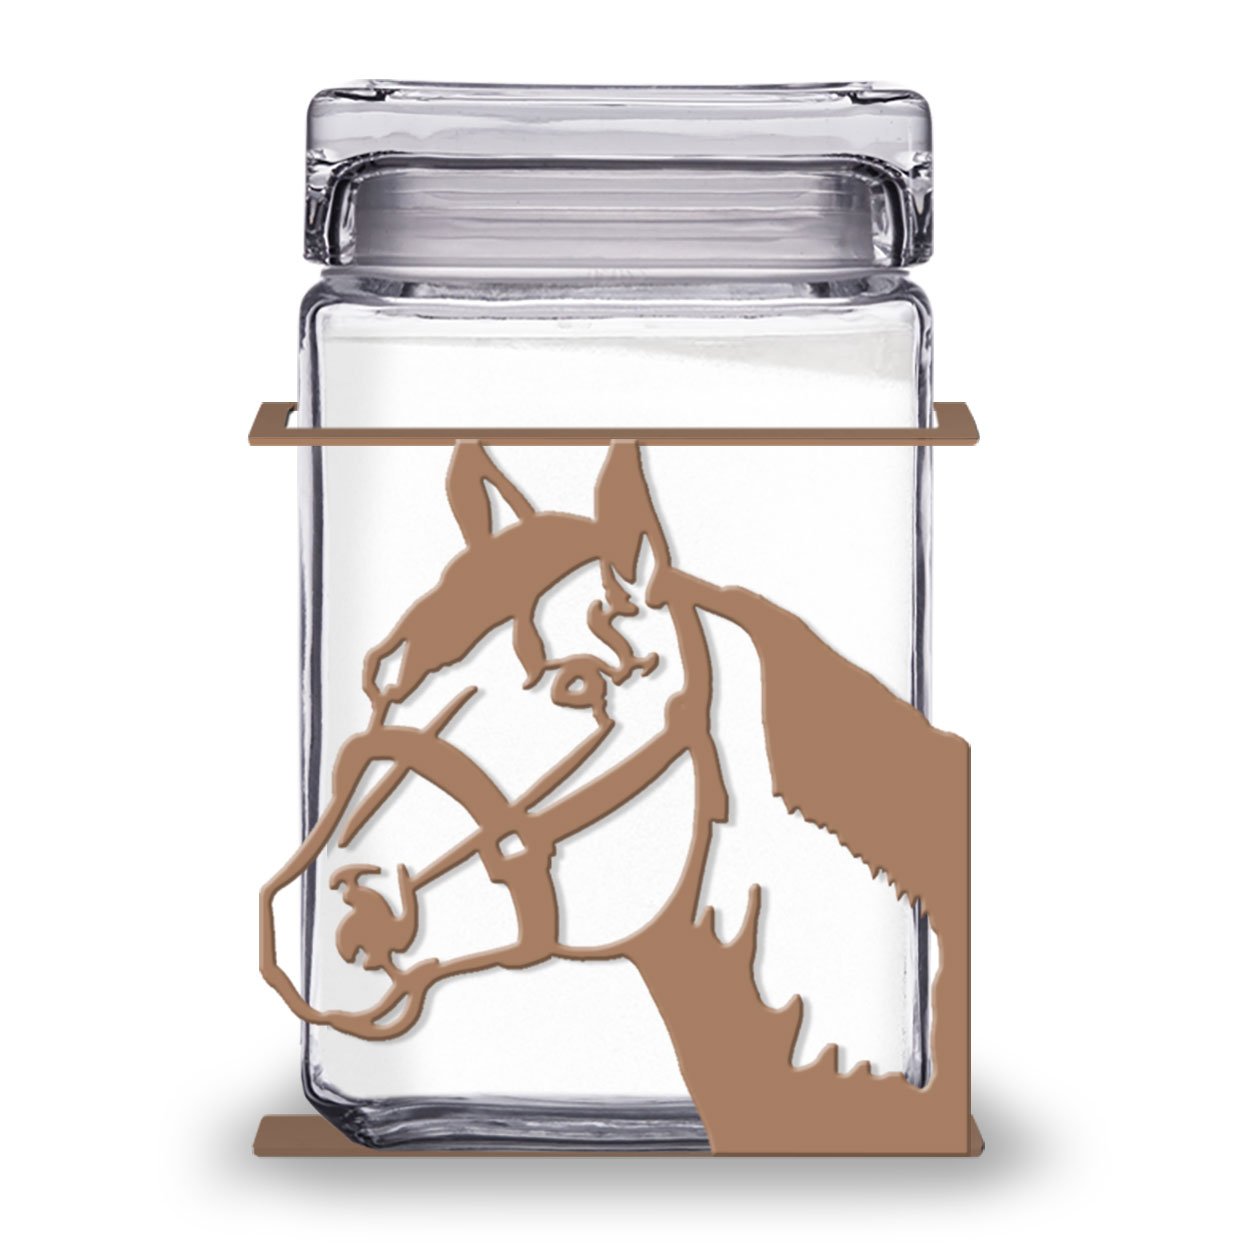 620062 - Horse 1.5-Quart Glass and Metal Canister - Choose Color